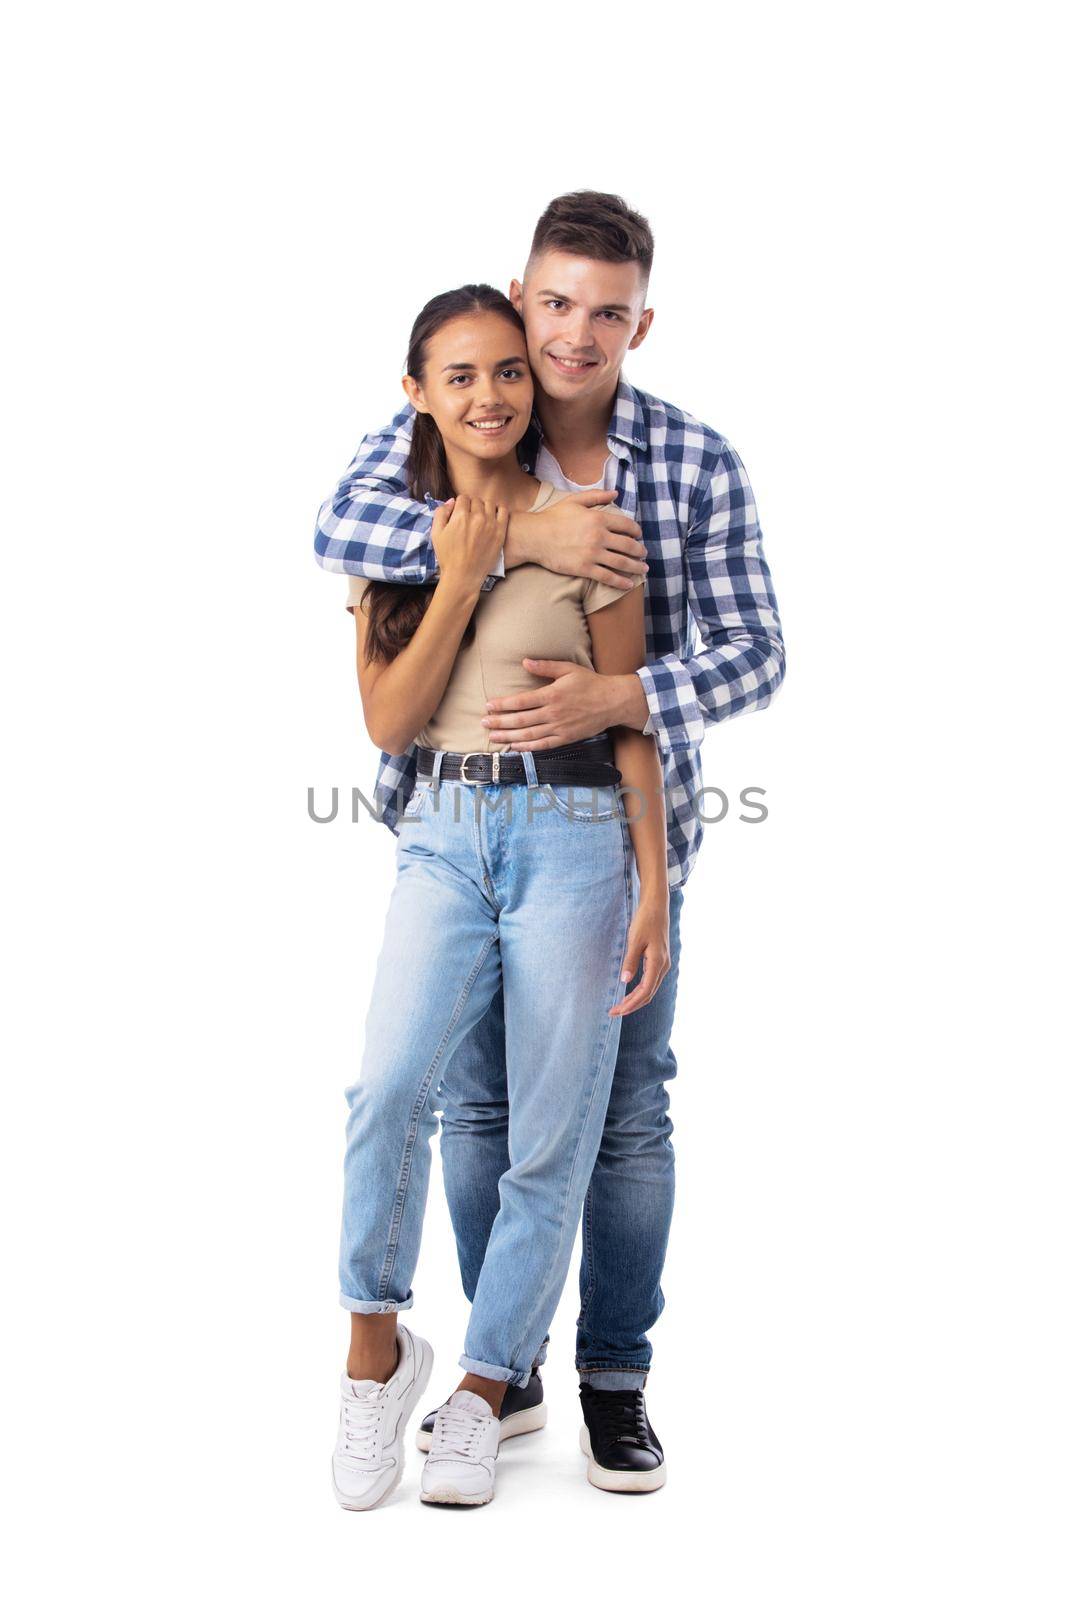 Smiling young couple embracing and standing full length isolated on white background